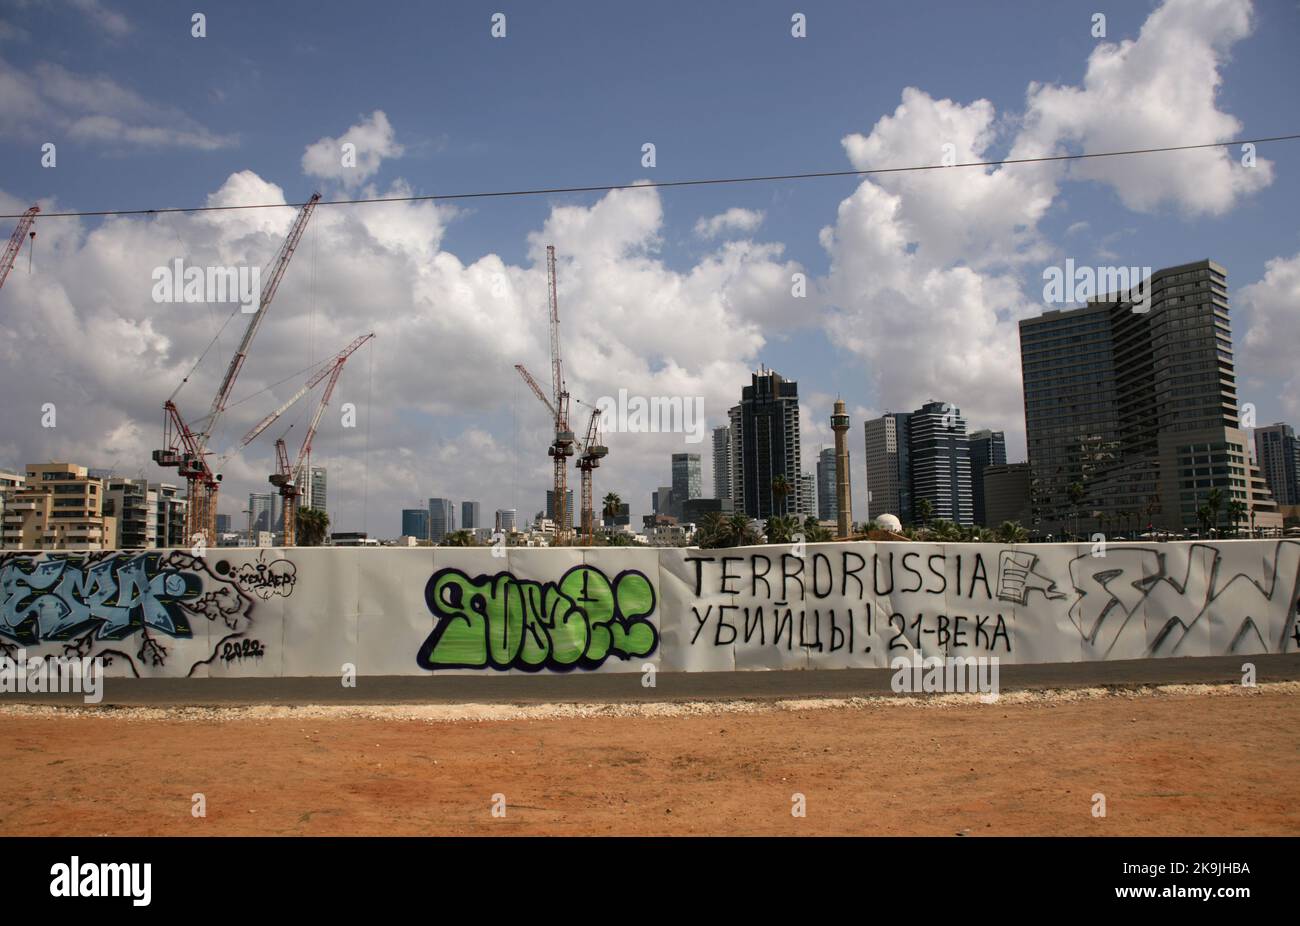 Jaffa, Israel: construction and anti-Russian graffiti in the foreground Stock Photo